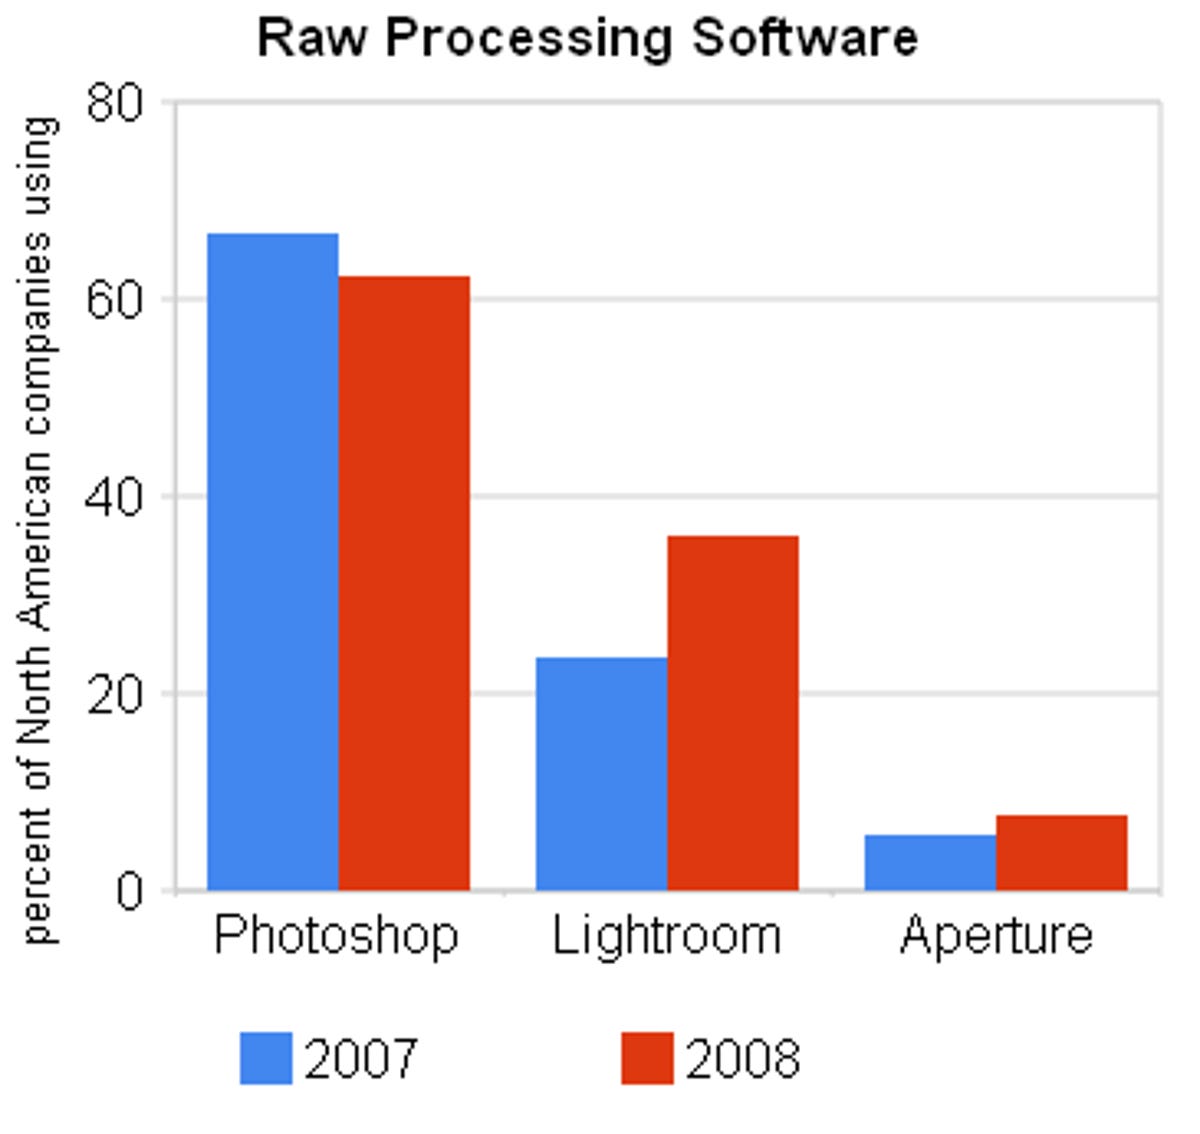 Lightroom and Aperture are gaining in popularity when it comes to processing raw images from higher-end digital cameras.